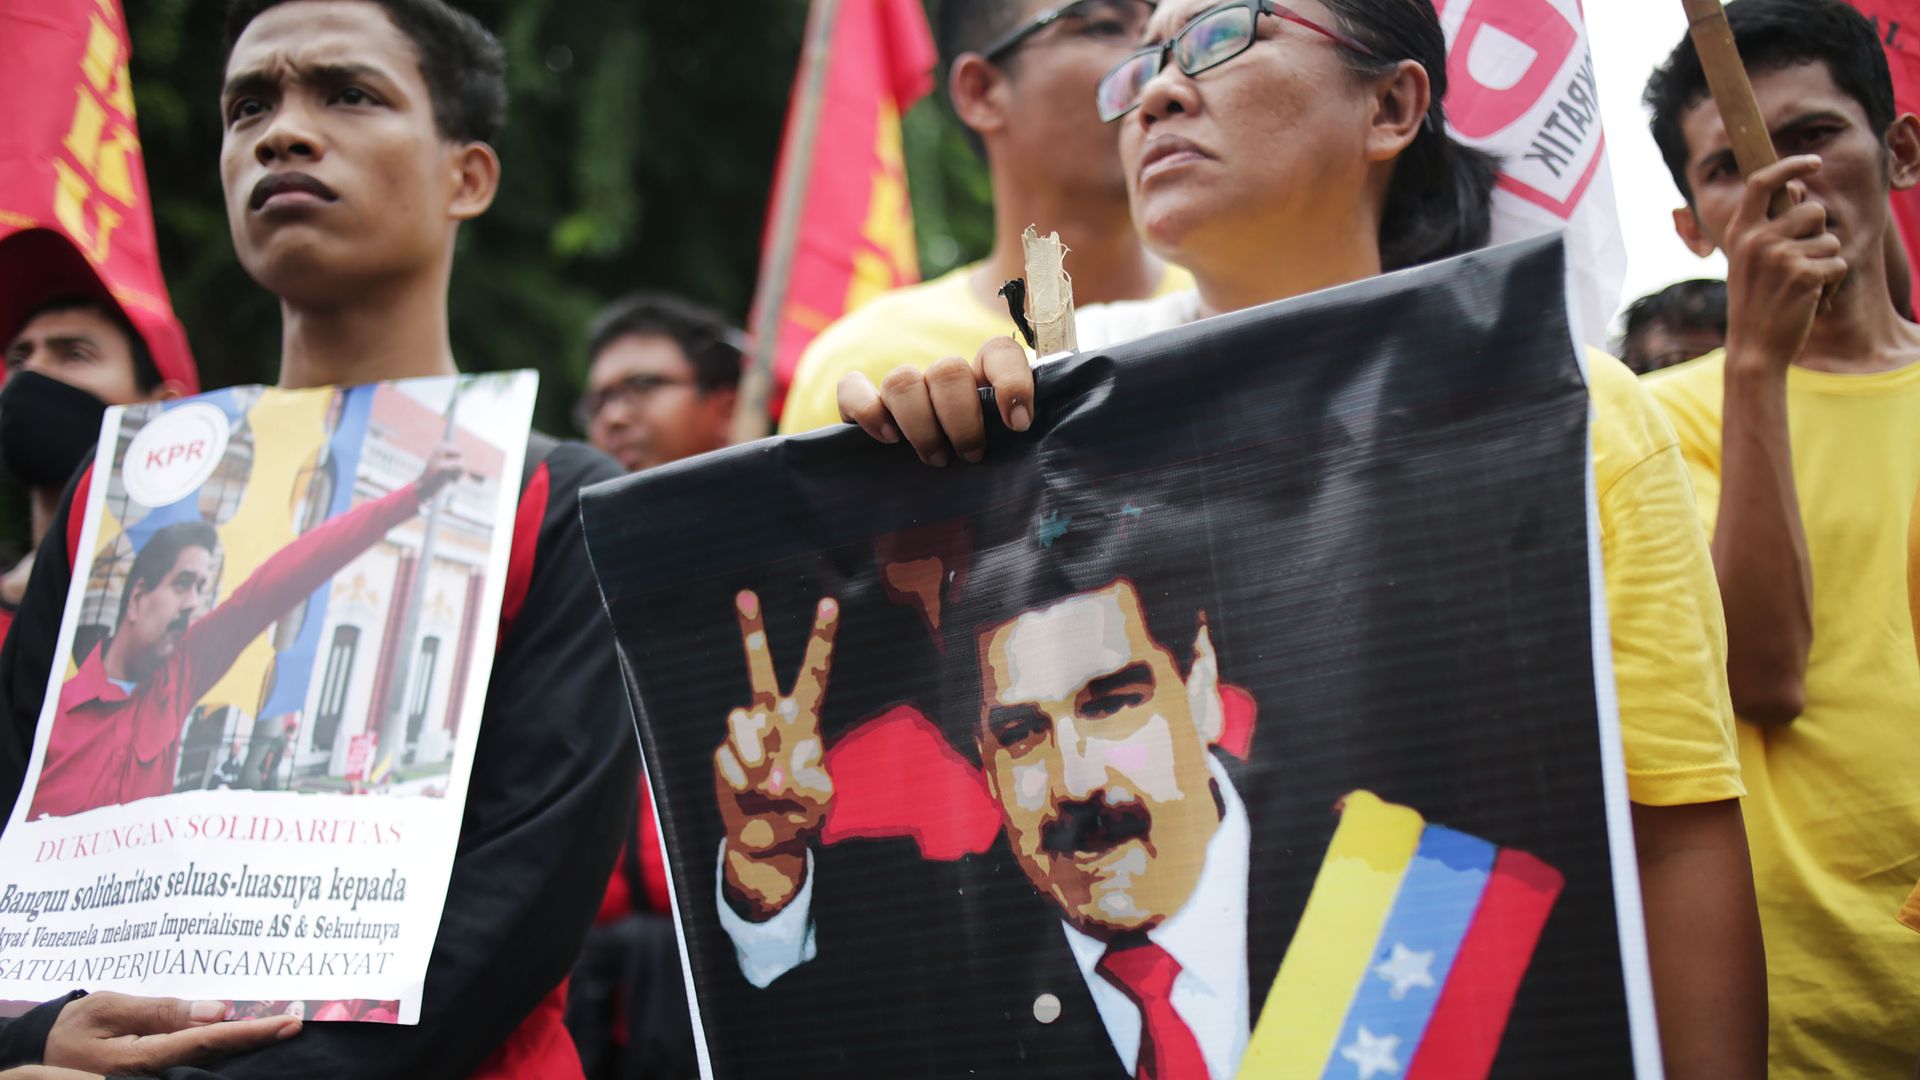 In this picture, a Venezuelan woman holds a banner of President Maduro at a protest. 